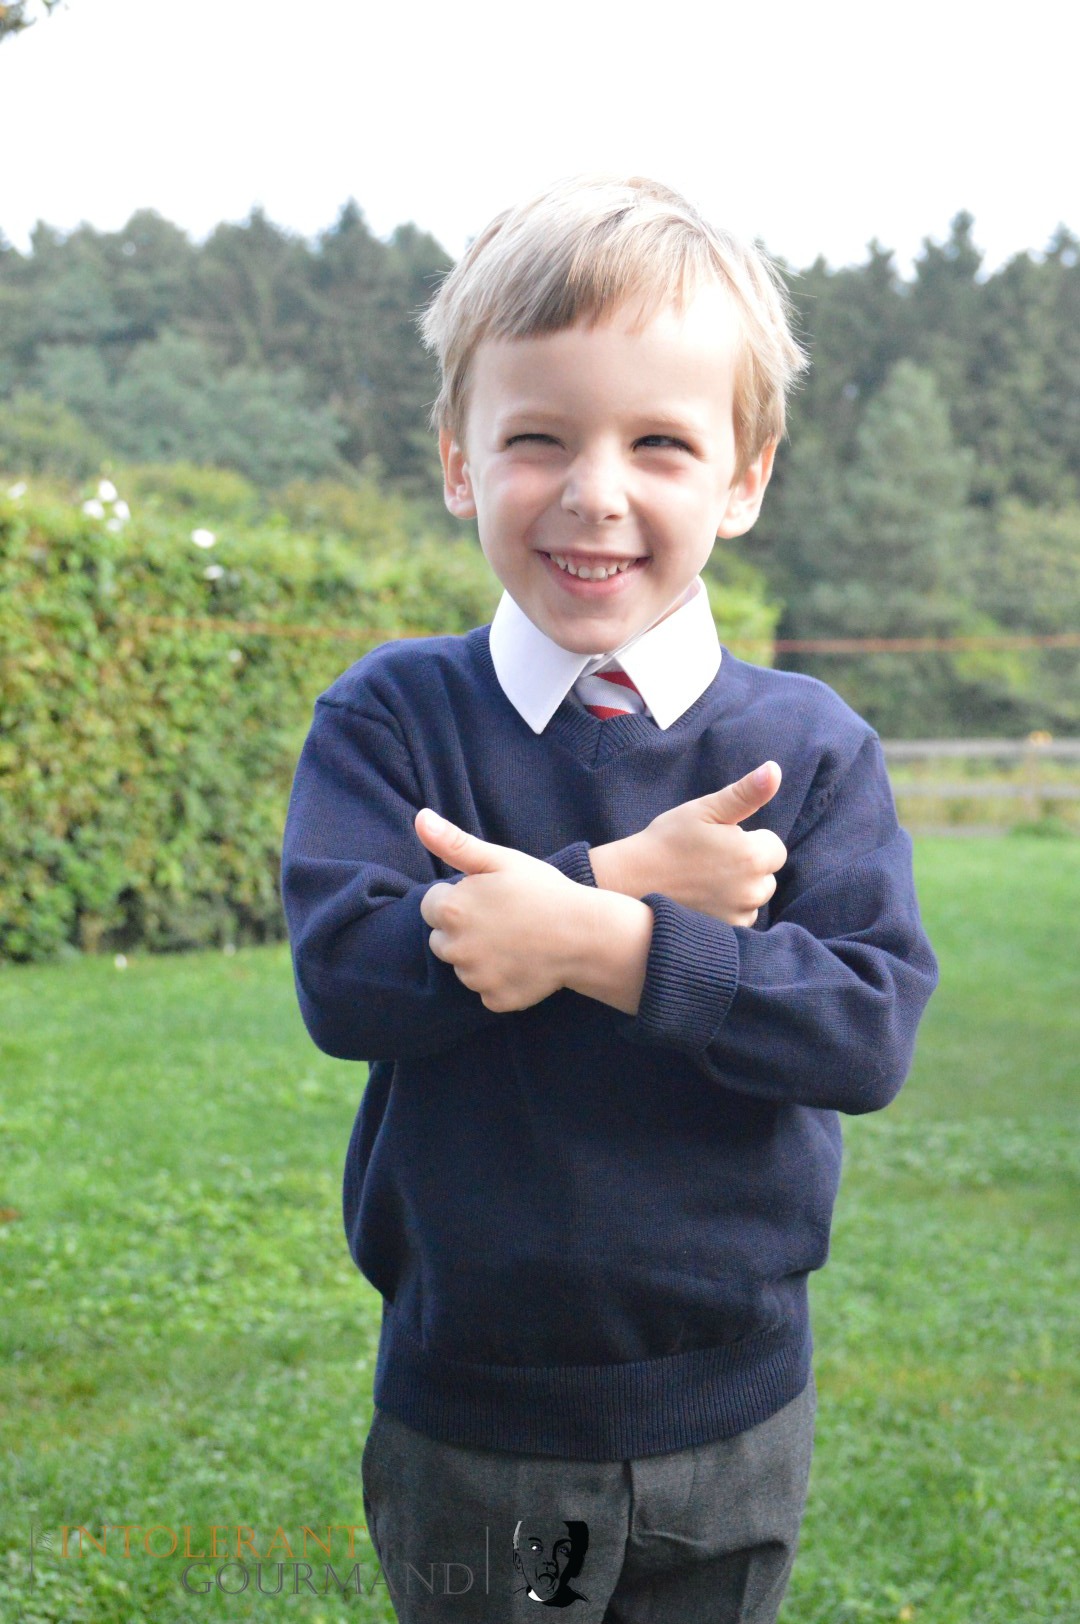 Callum 1st day at school - despite multiple severe allergies, eczema and asthma, Callum has successfully managed to start school in a safe and accommodating environment and he is loving his new adventure! www.intolerantgourmand.com